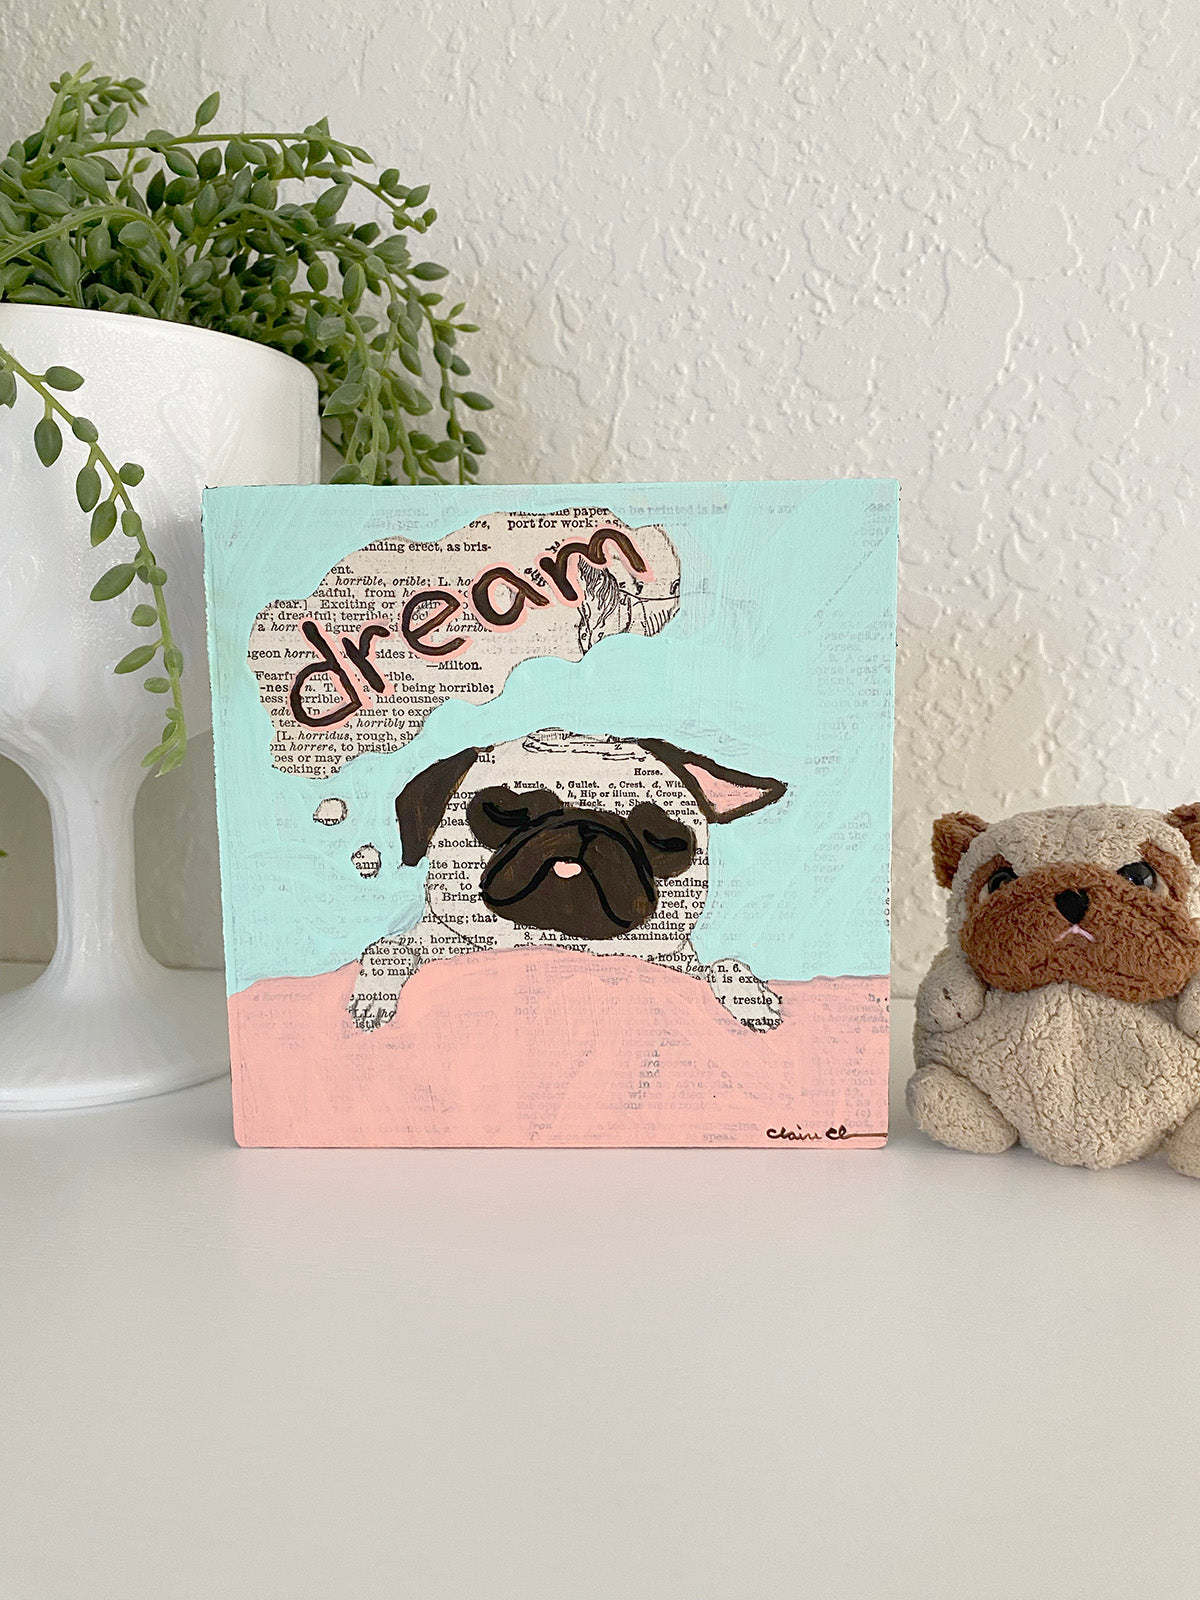 Dream - Original Word of the Year Painting